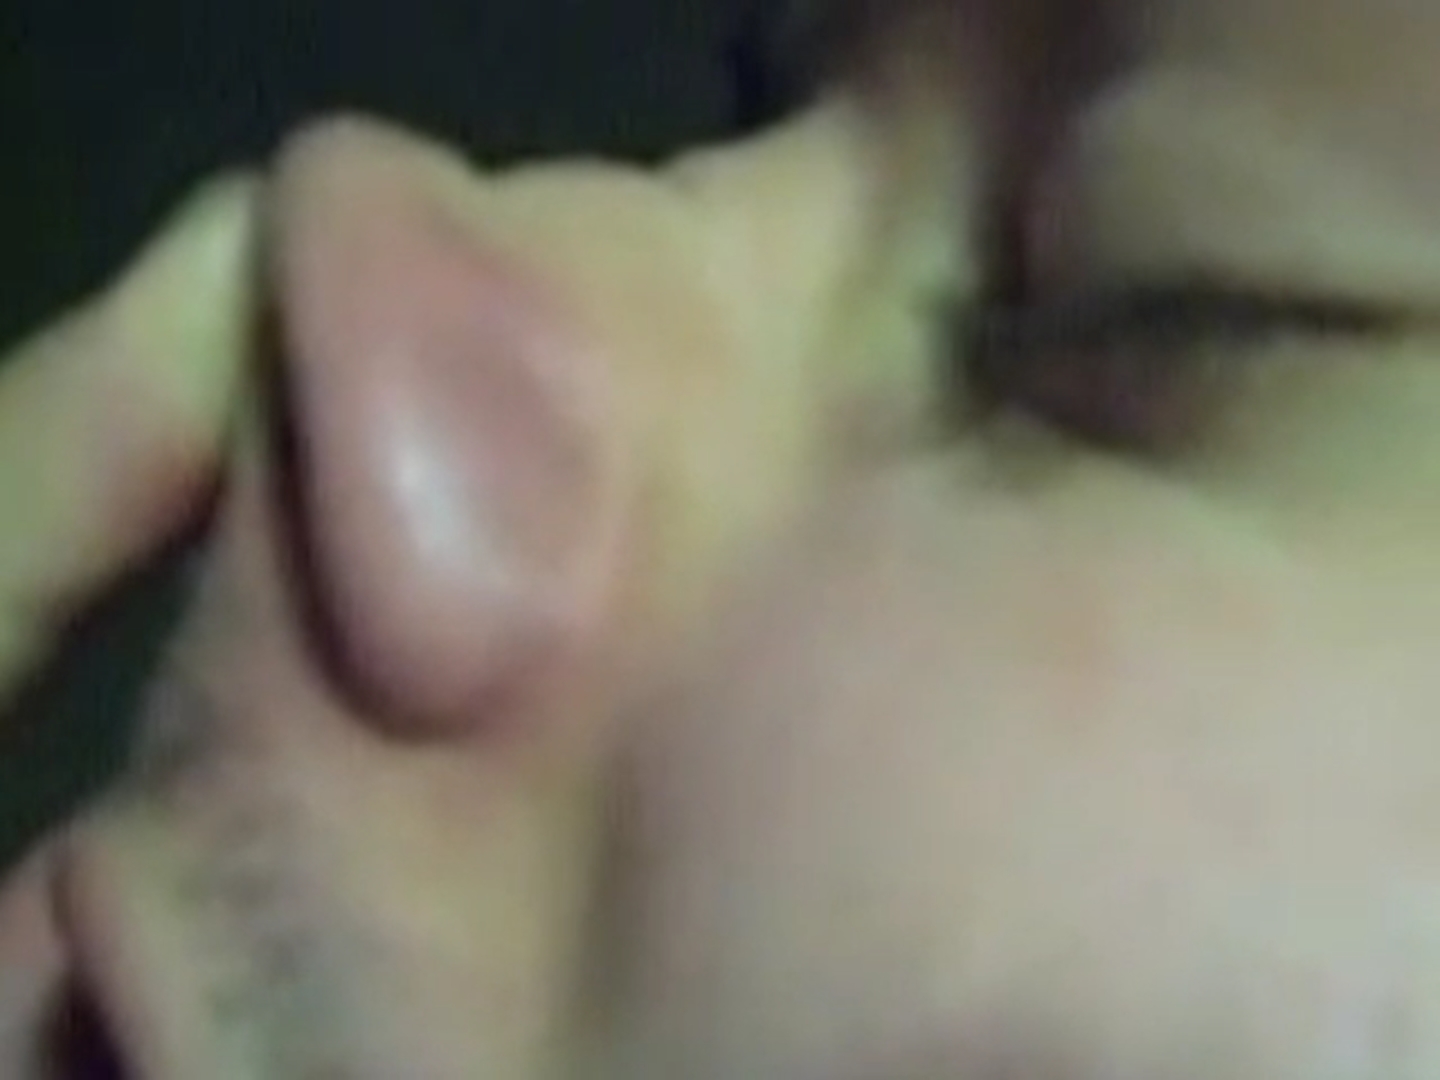 Some sexy Nose playing